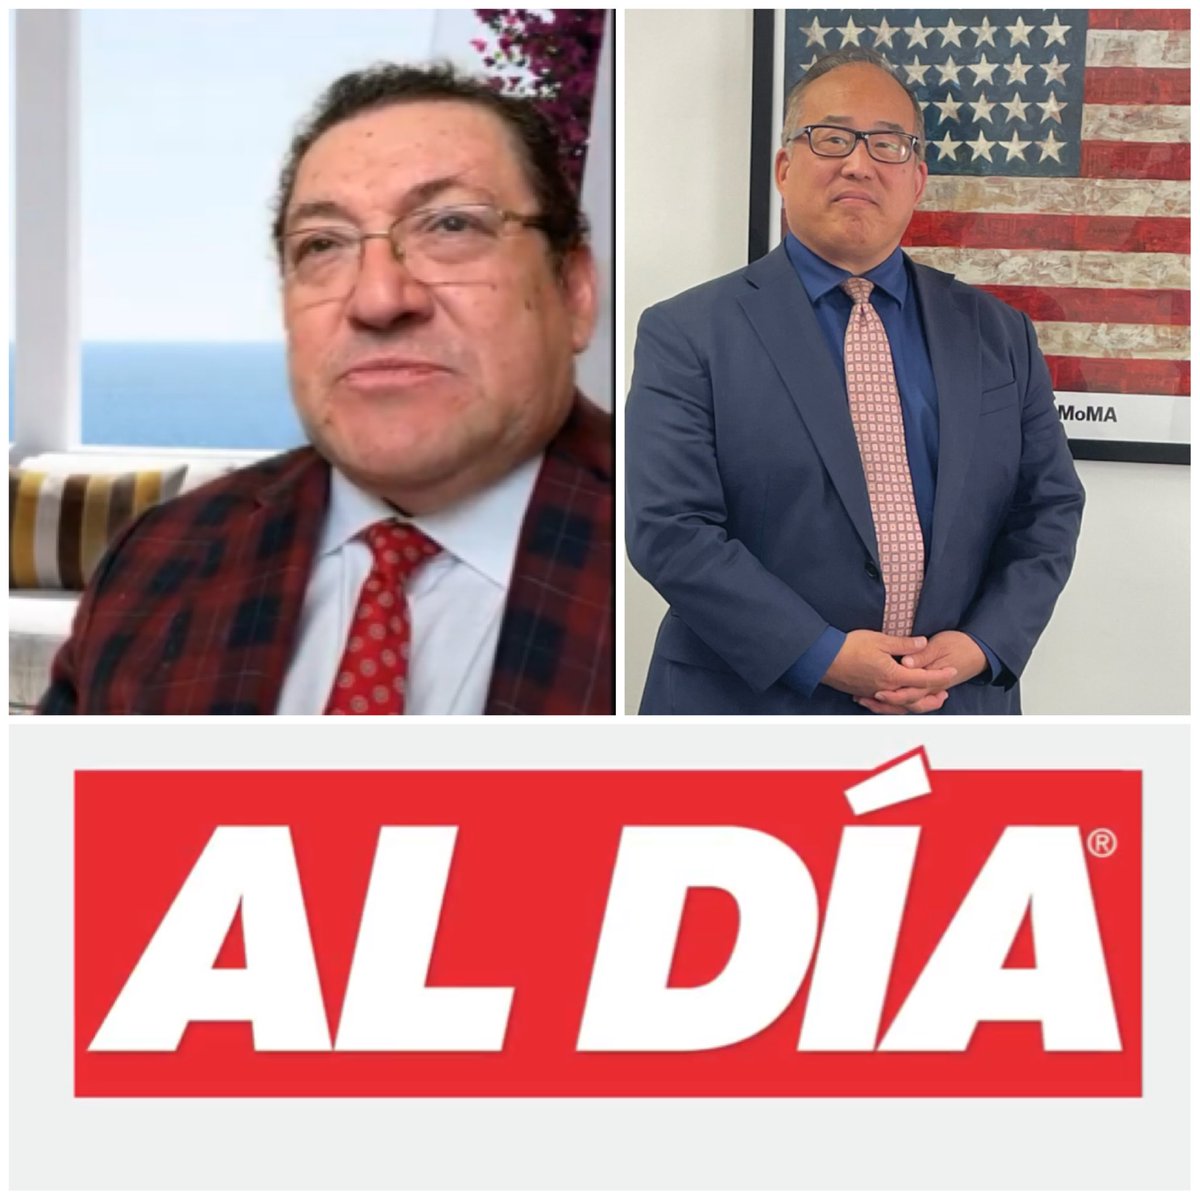 'The administration doesn't listen to people' - David Oh As the mayoral candidates race to the finish line the Republican candidate David Oh sat with Editor-in-Chief Hernan Guaracao to discuss real change in city. Full interview: aldianews.com/en/leadership/…